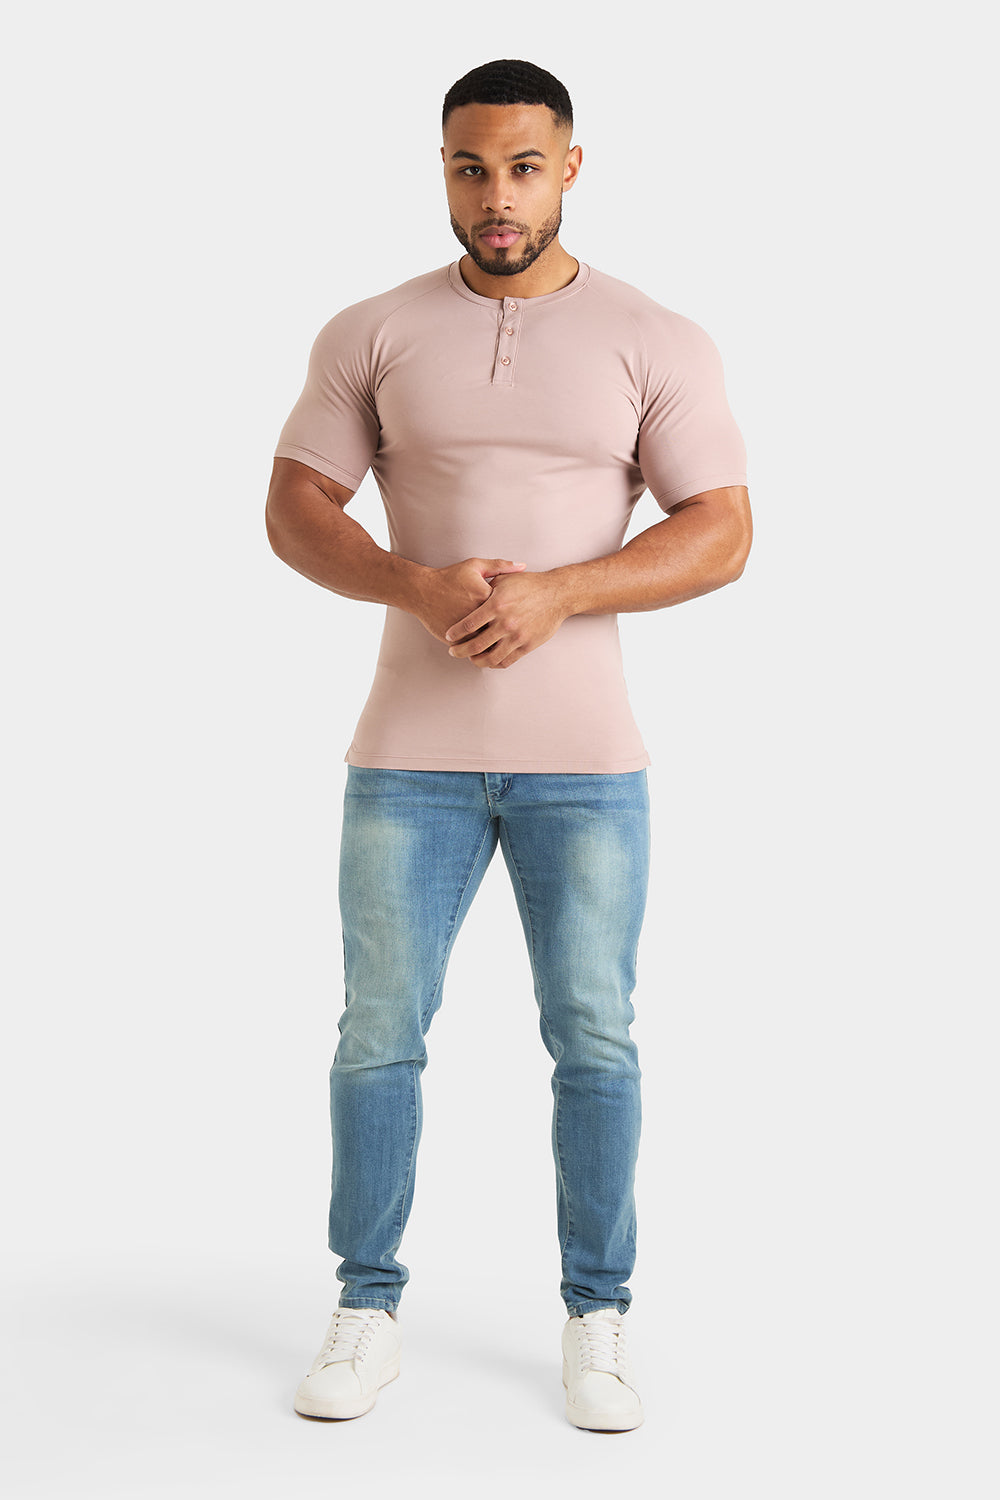 Everyday Henley T-Shirt in Dusty Rose - TAILORED ATHLETE - ROW